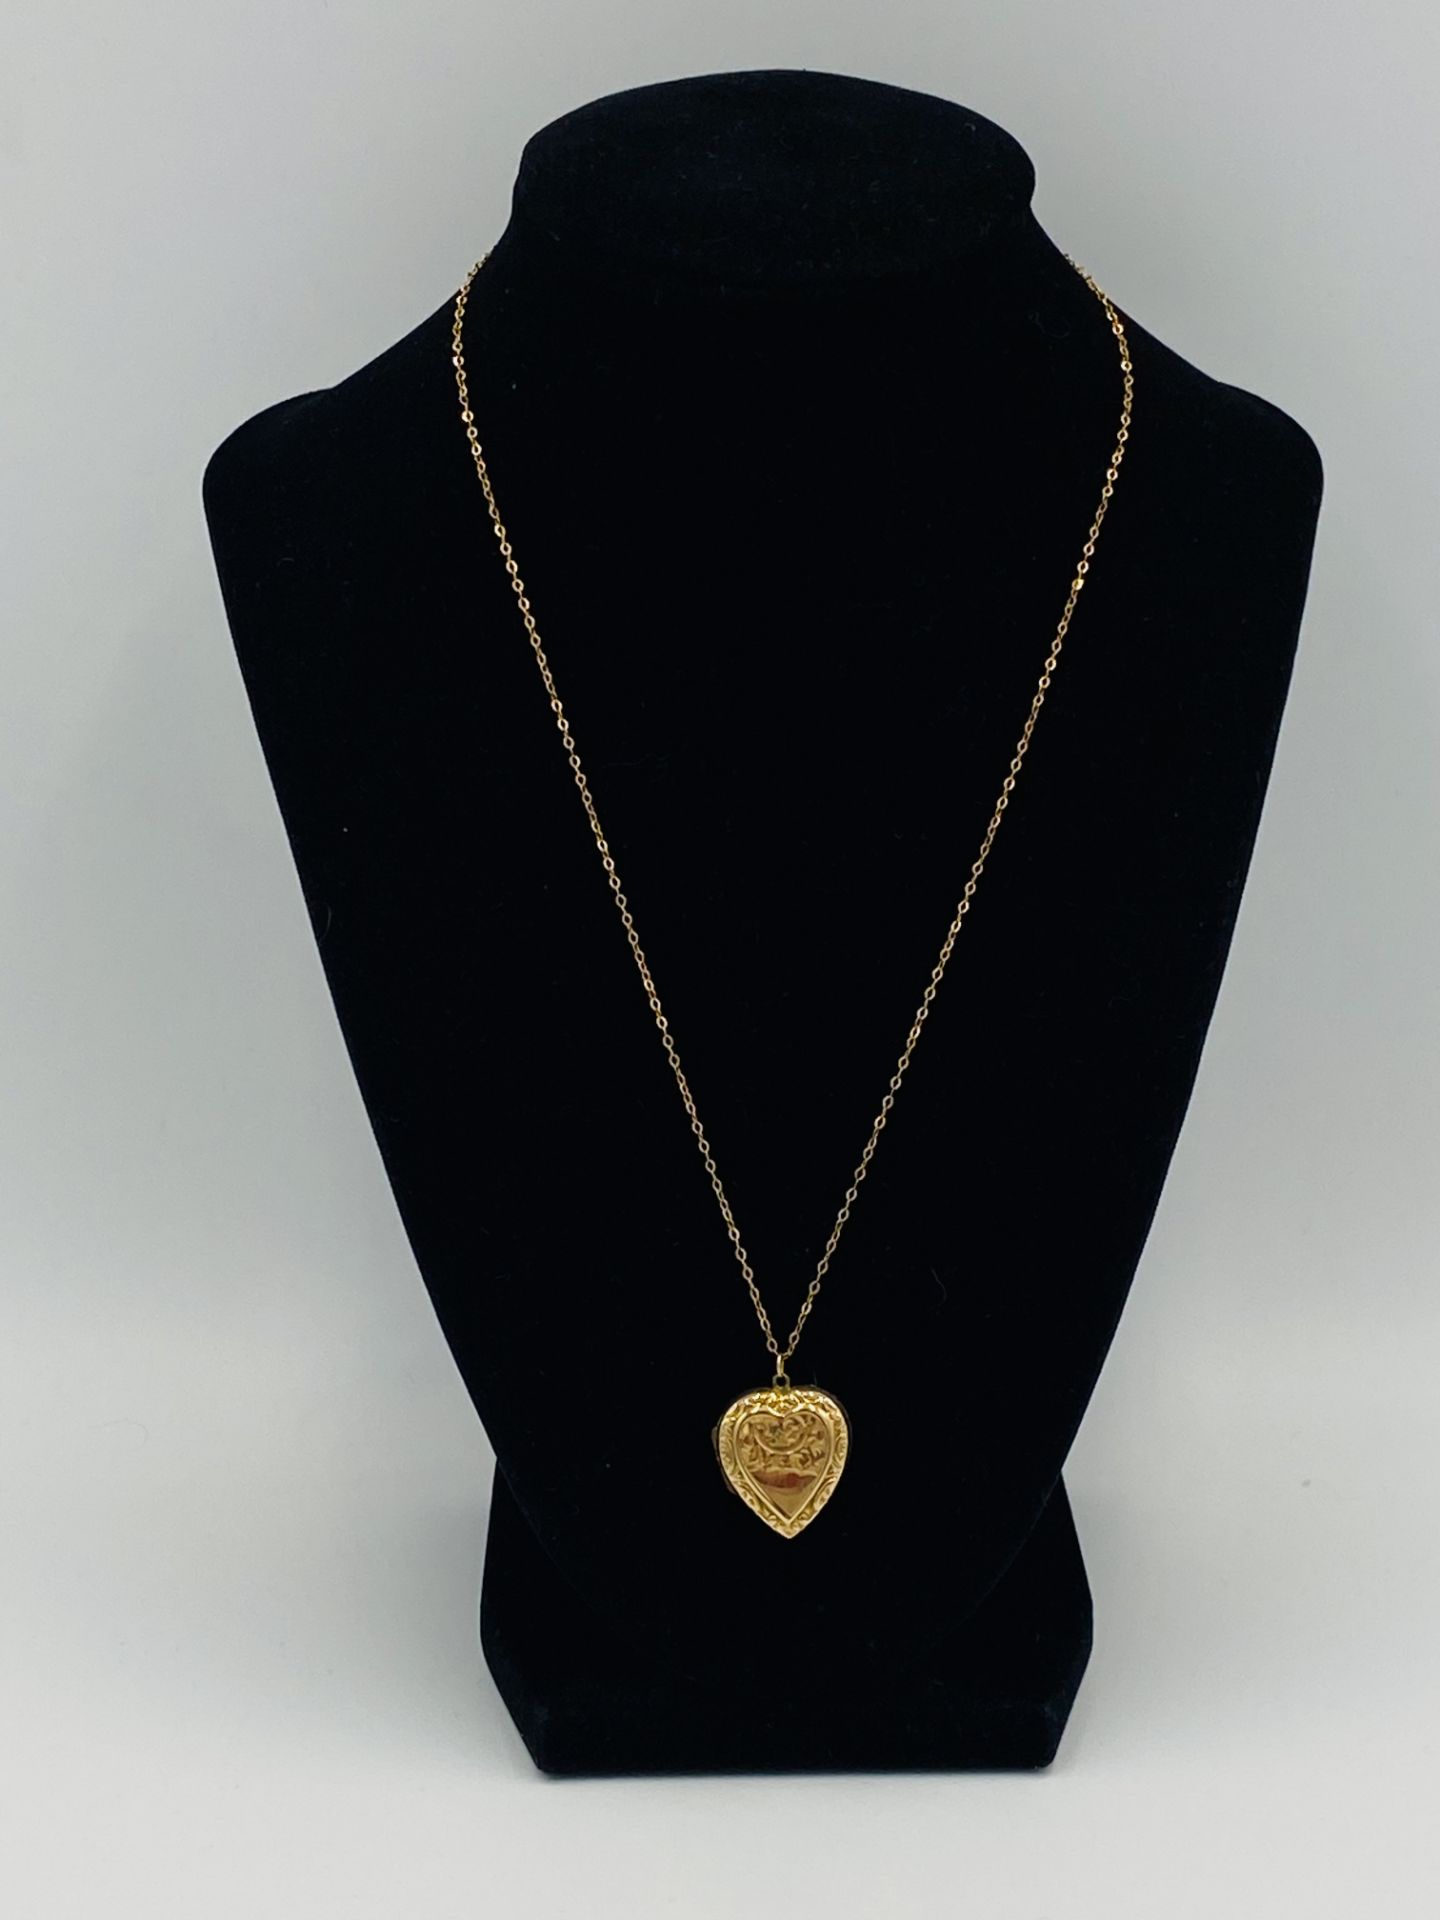 9ct gold heart shaped locket on a 9ct gold chain - Image 4 of 4